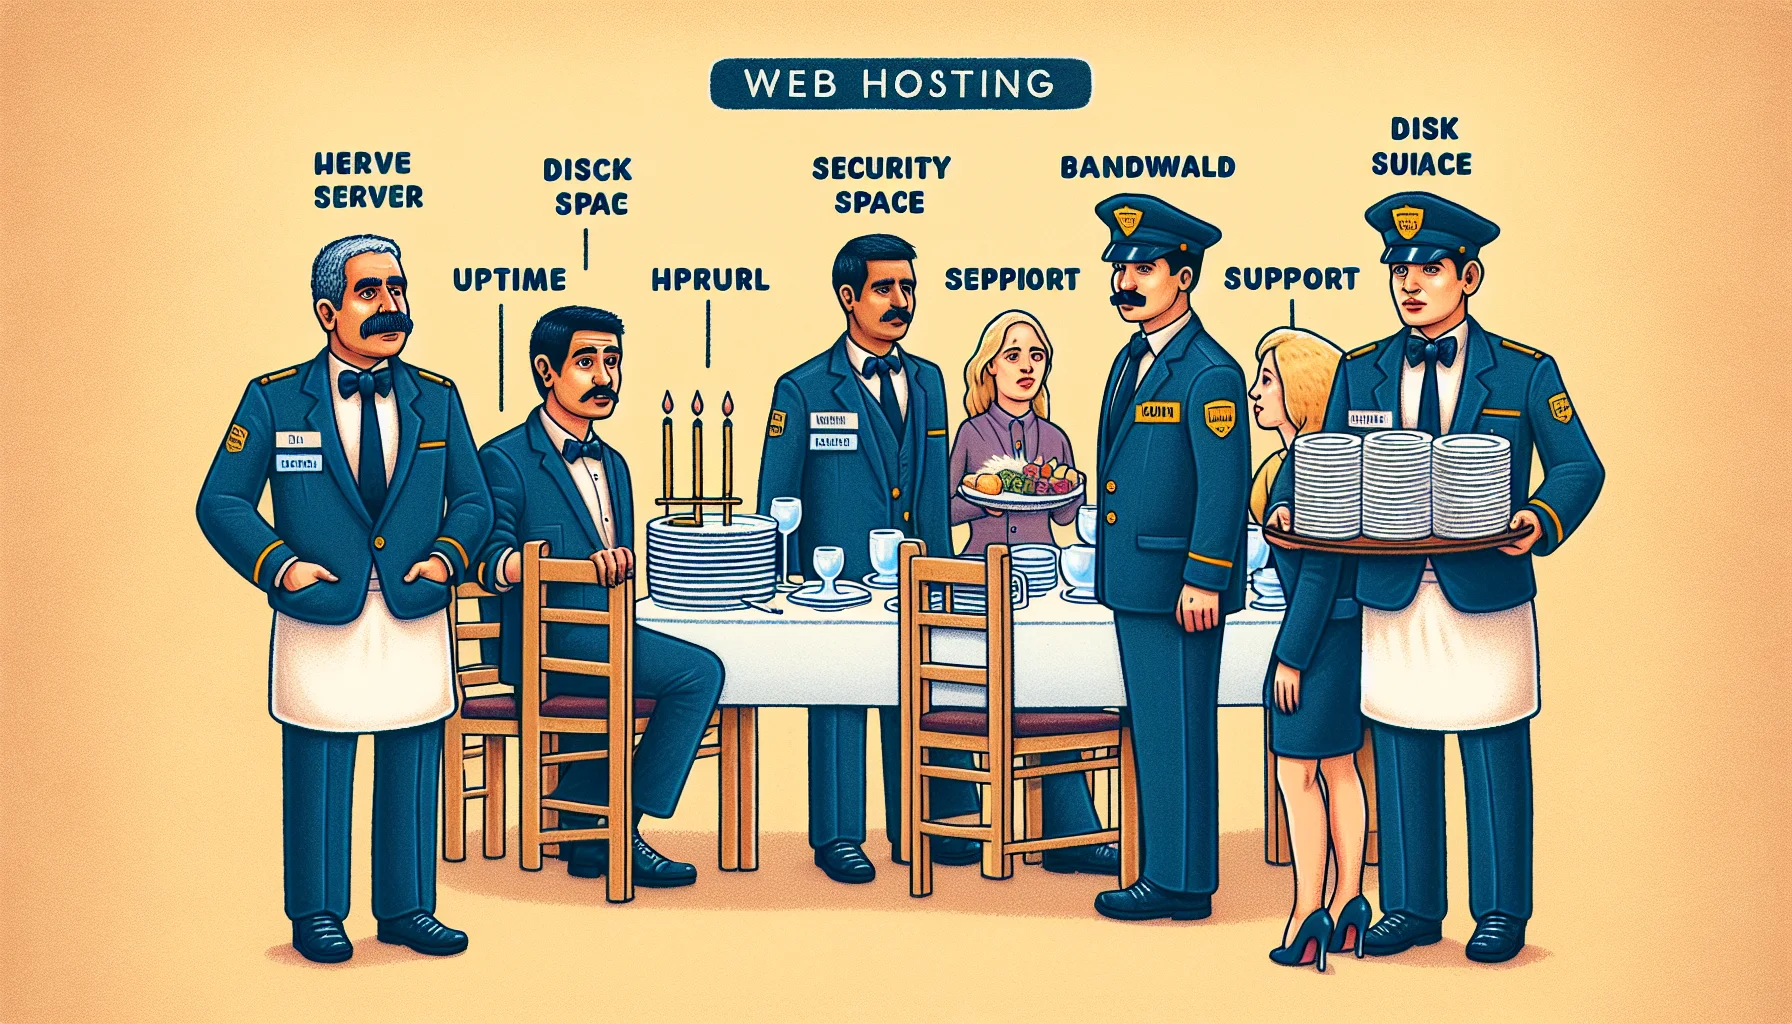 Create a detailed and humorous depiction of a guide to web hosting. Imagine a characteristically Middle Eastern man, wearing a classic 'server' costume to represent the web server, attending to numerous tables representing websites with various needs. Nearby, another man of South Asian descent wearing a 'security guard' outfit represents the firewall, cautiously watching everything. A woman with Hispanic features appears as a 'customer', holding a menu titled 'Hosting Packages'. Utilize settings that are relevant to web hosting such as 'uptime', 'bandwidth', 'disk space' and 'support' being portrayed as parts of the restaurant.